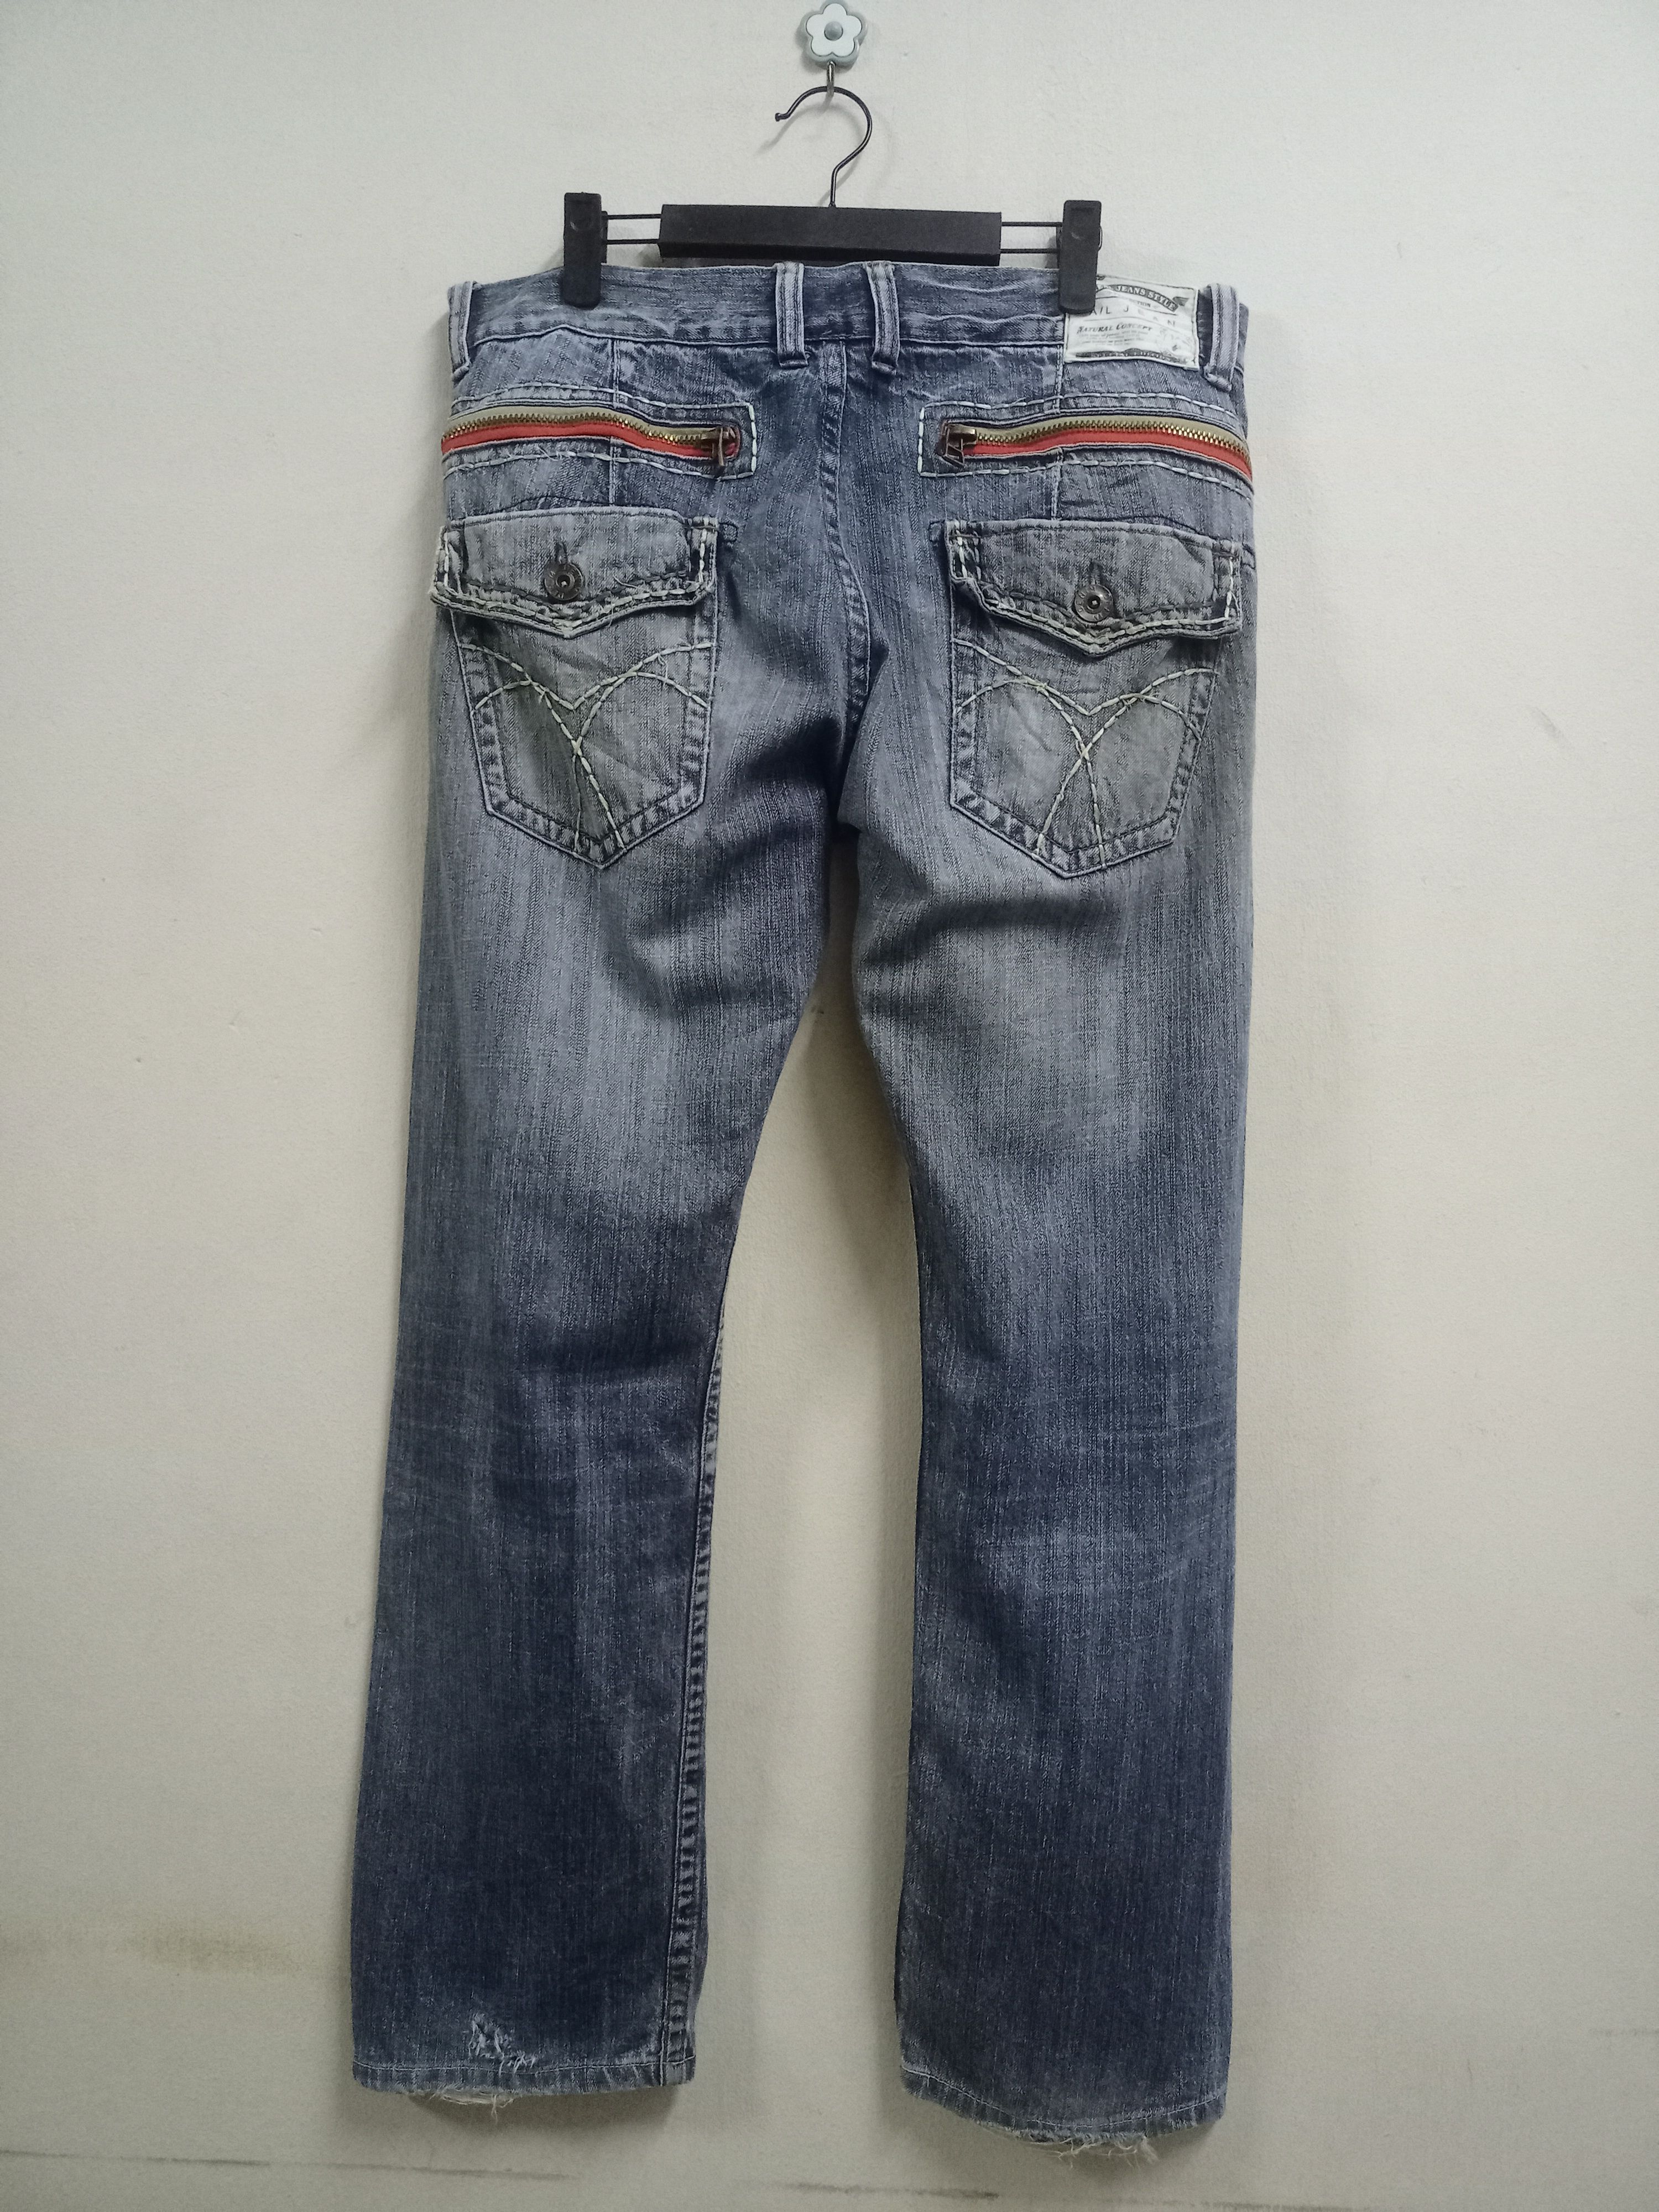 Distressed Denim Vintage Anti Label Blue Wash Distressed Baggy Jeans 35x29 Size US 35 - 2 Preview